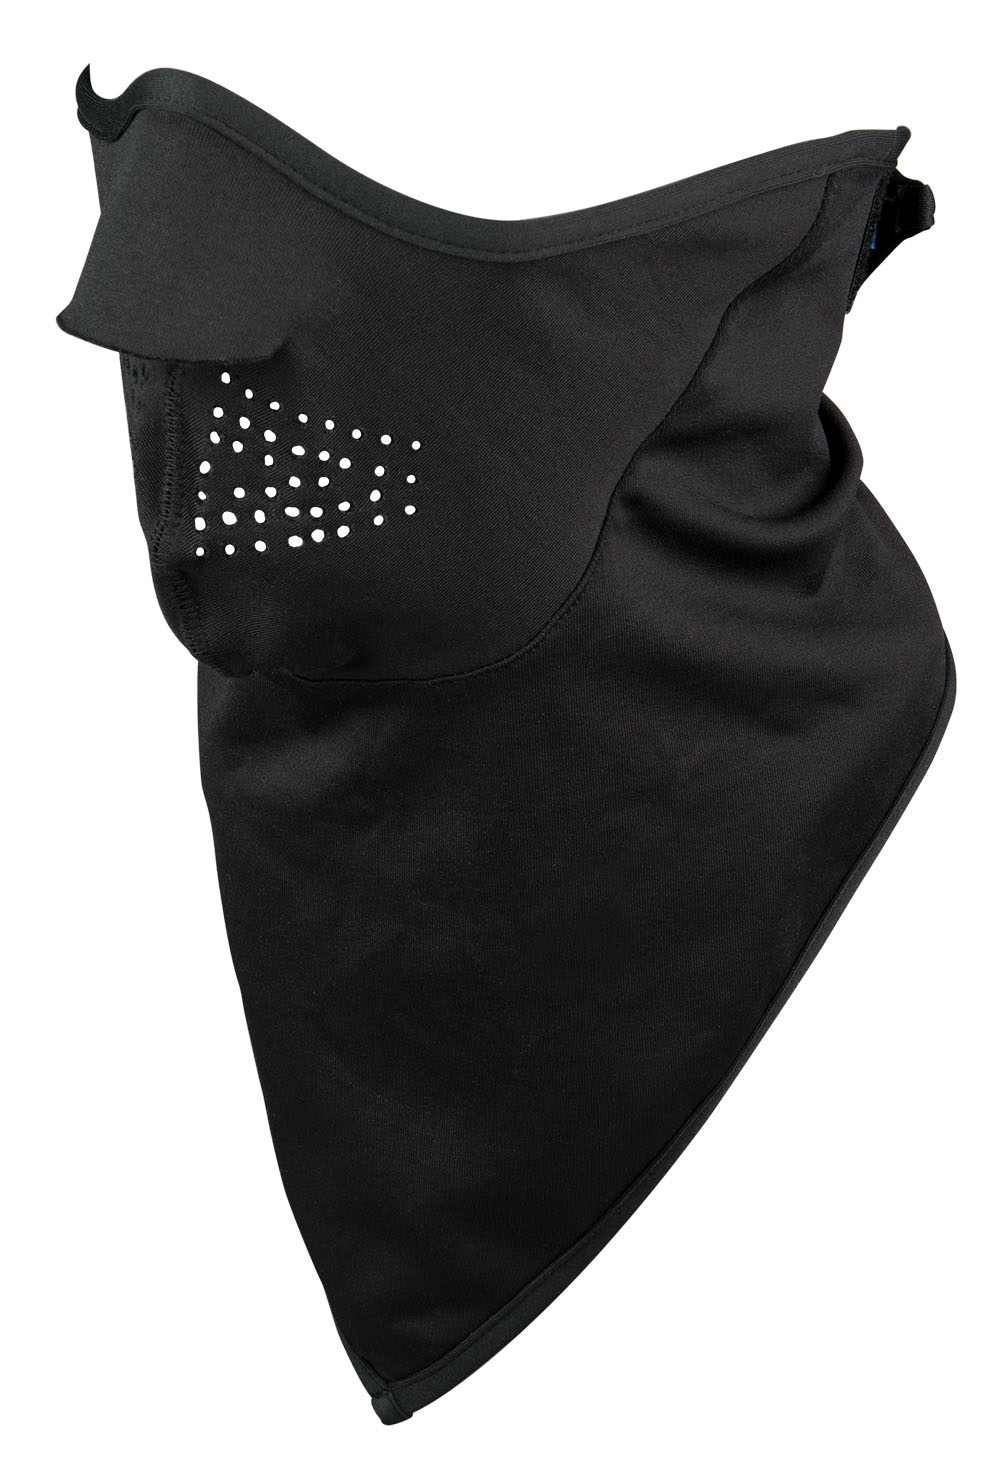 Black Hawk 2 in 1 Half Mask with Neck Wrap - Facemasks